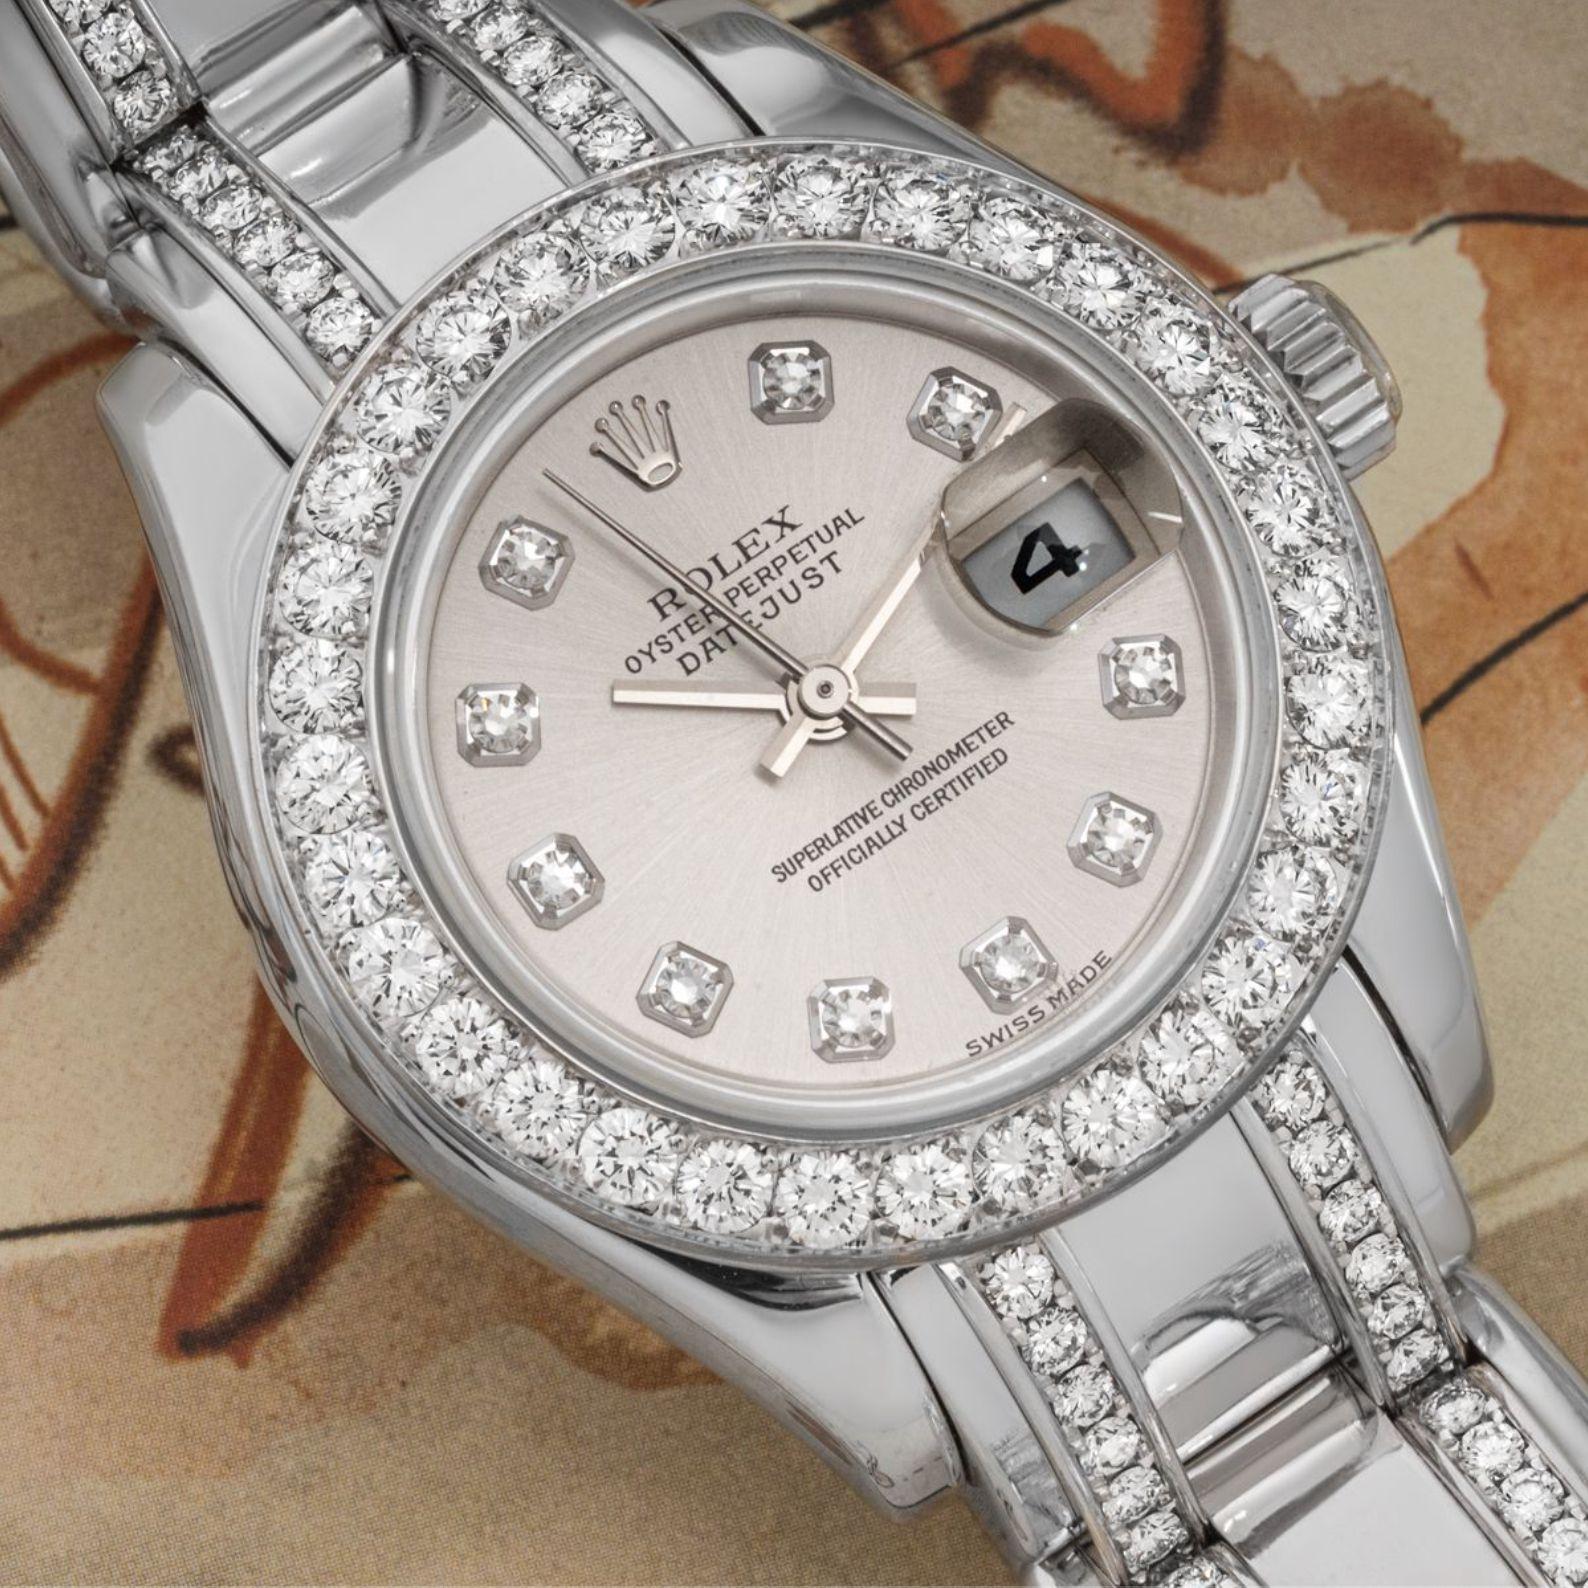 A white Gold Datejust Pearlmaster by Rolex. Features a silver dial with diamond hour markers and a fixed white gold bezel set with approximately 32 round brilliant cut diamonds.

The white gold Pearlmaster bracelet is set with 154 round brilliant